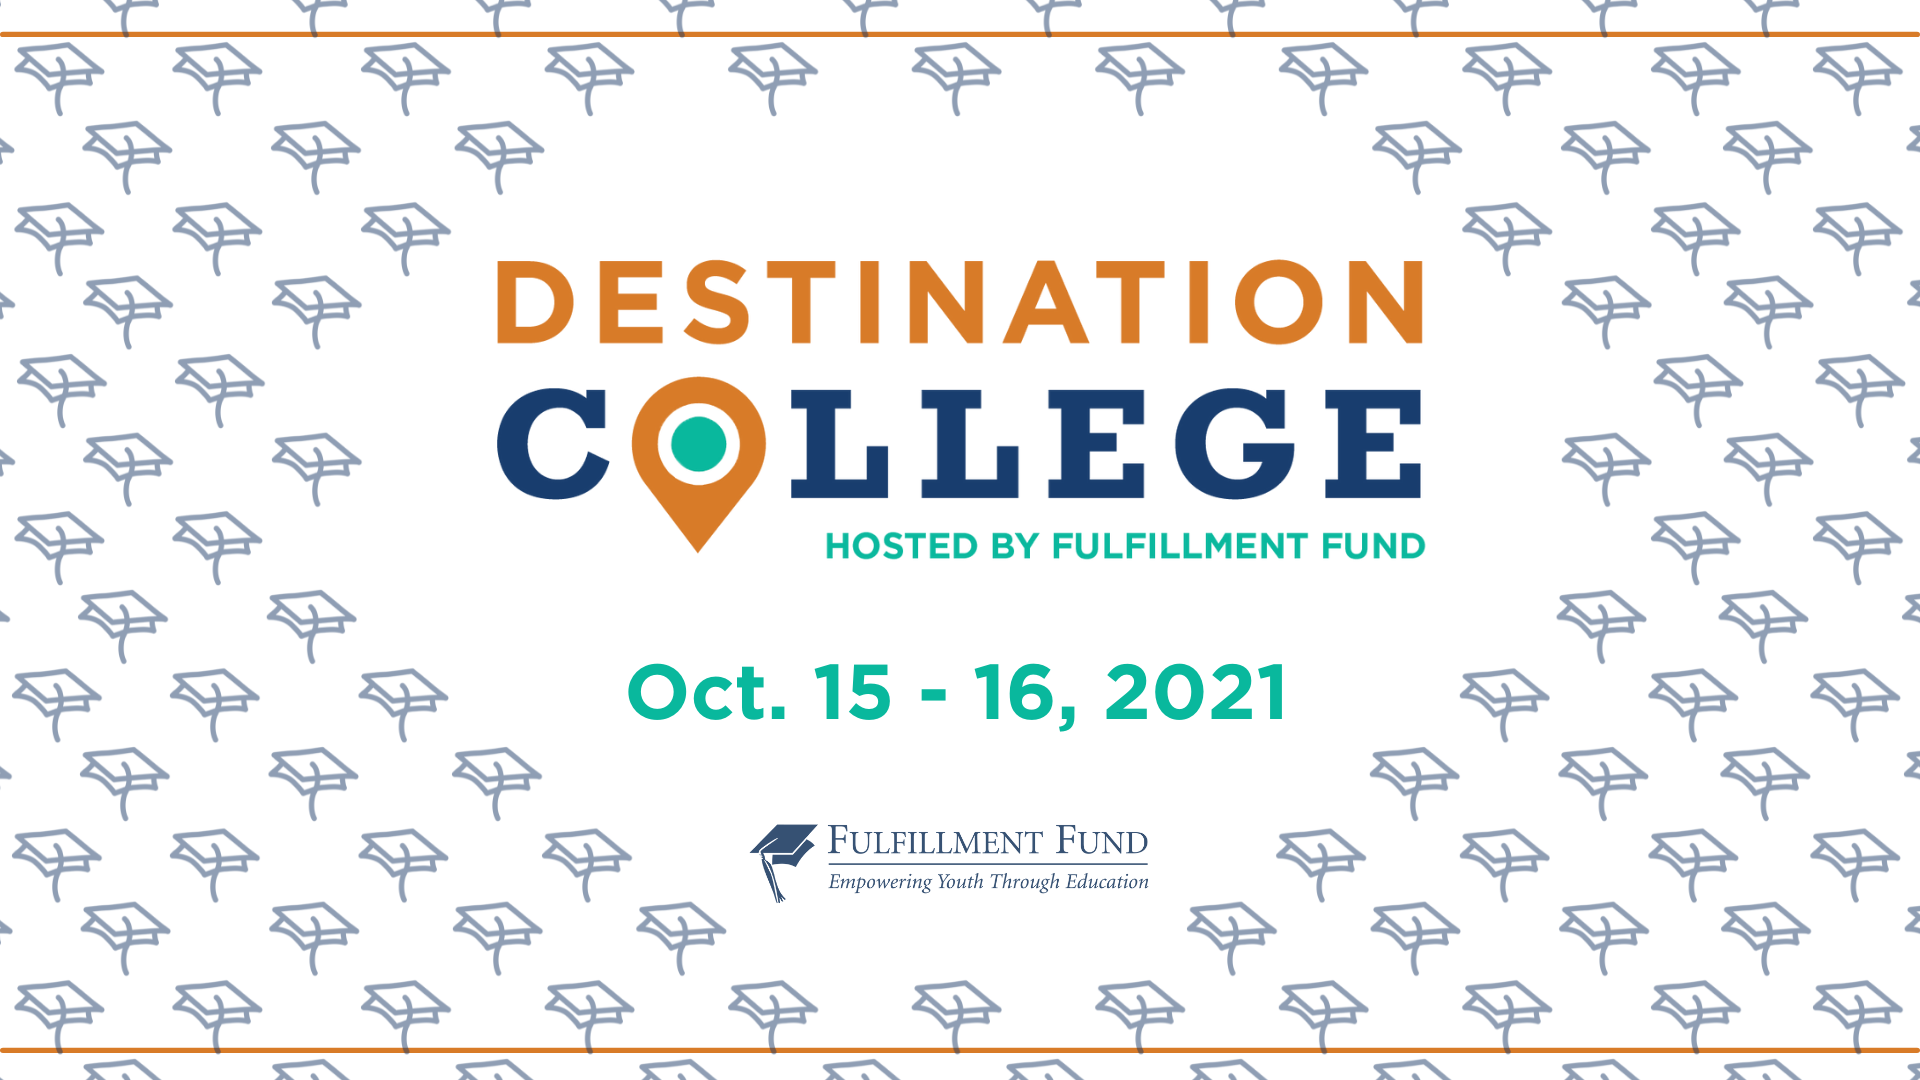 Learn more about this year's Destination College